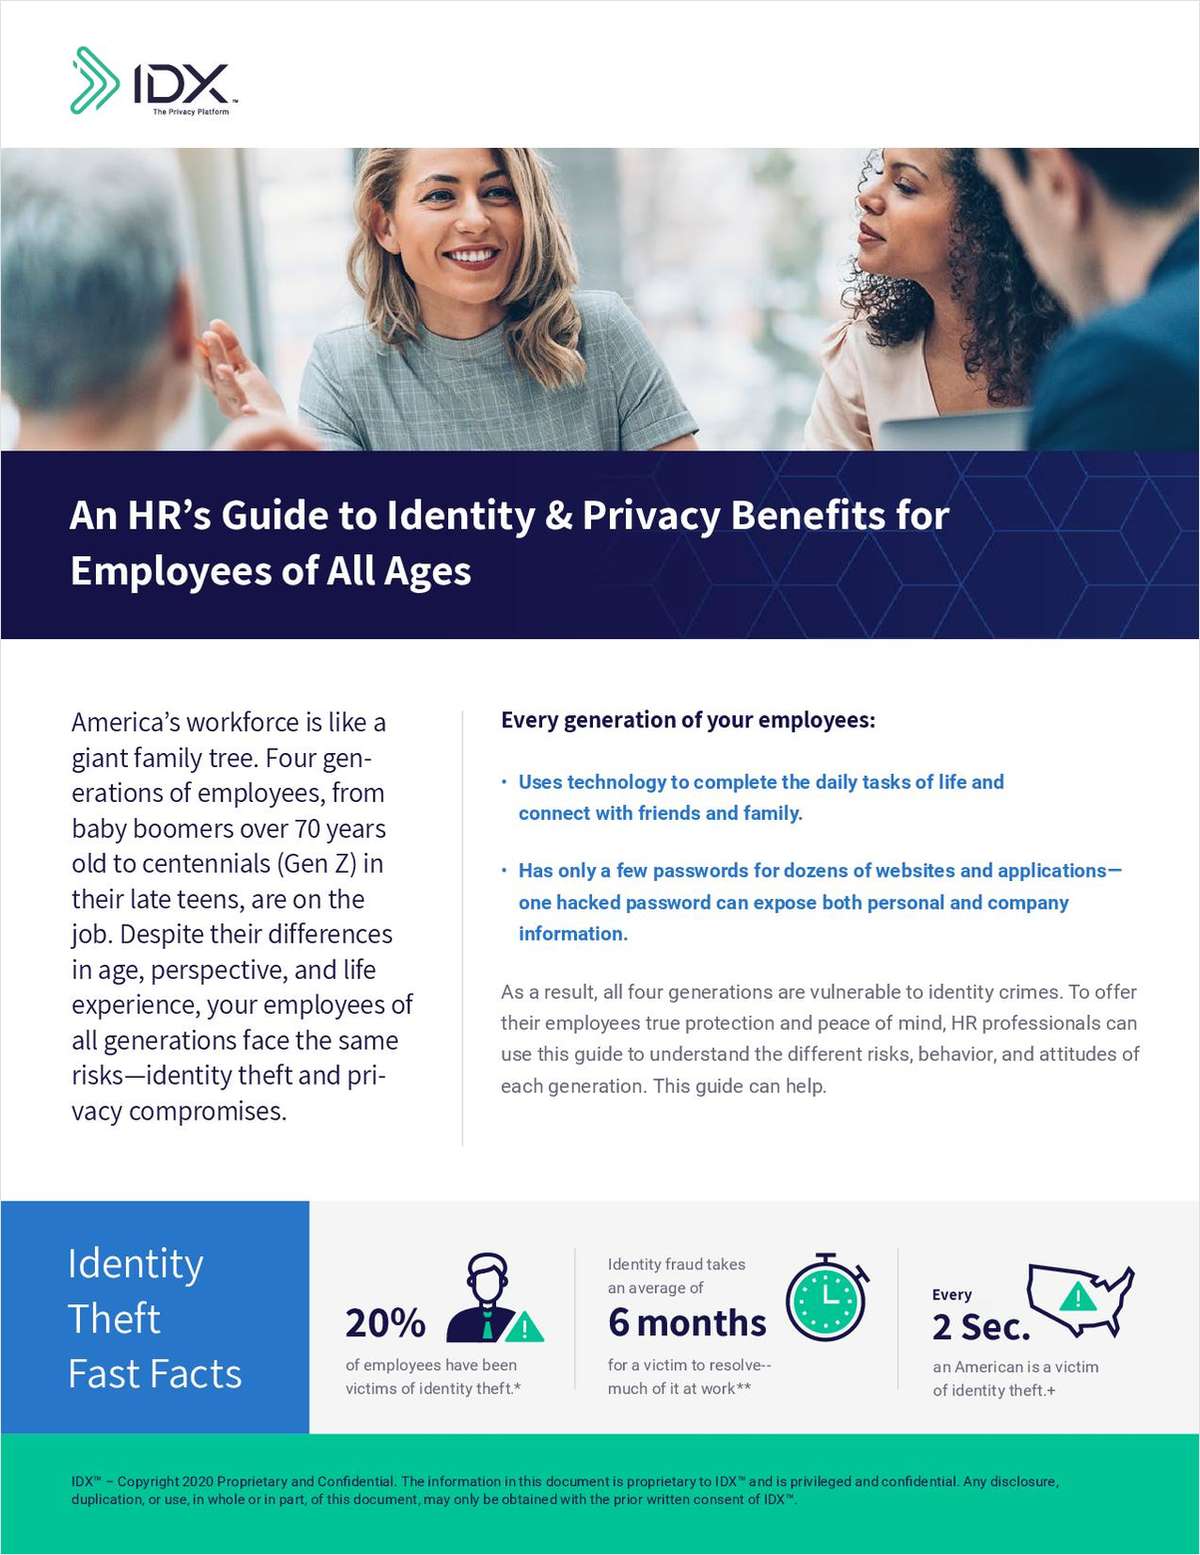 Help Your Clients With Identity & Privacy Benefits To Protect Their Employees of All Ages